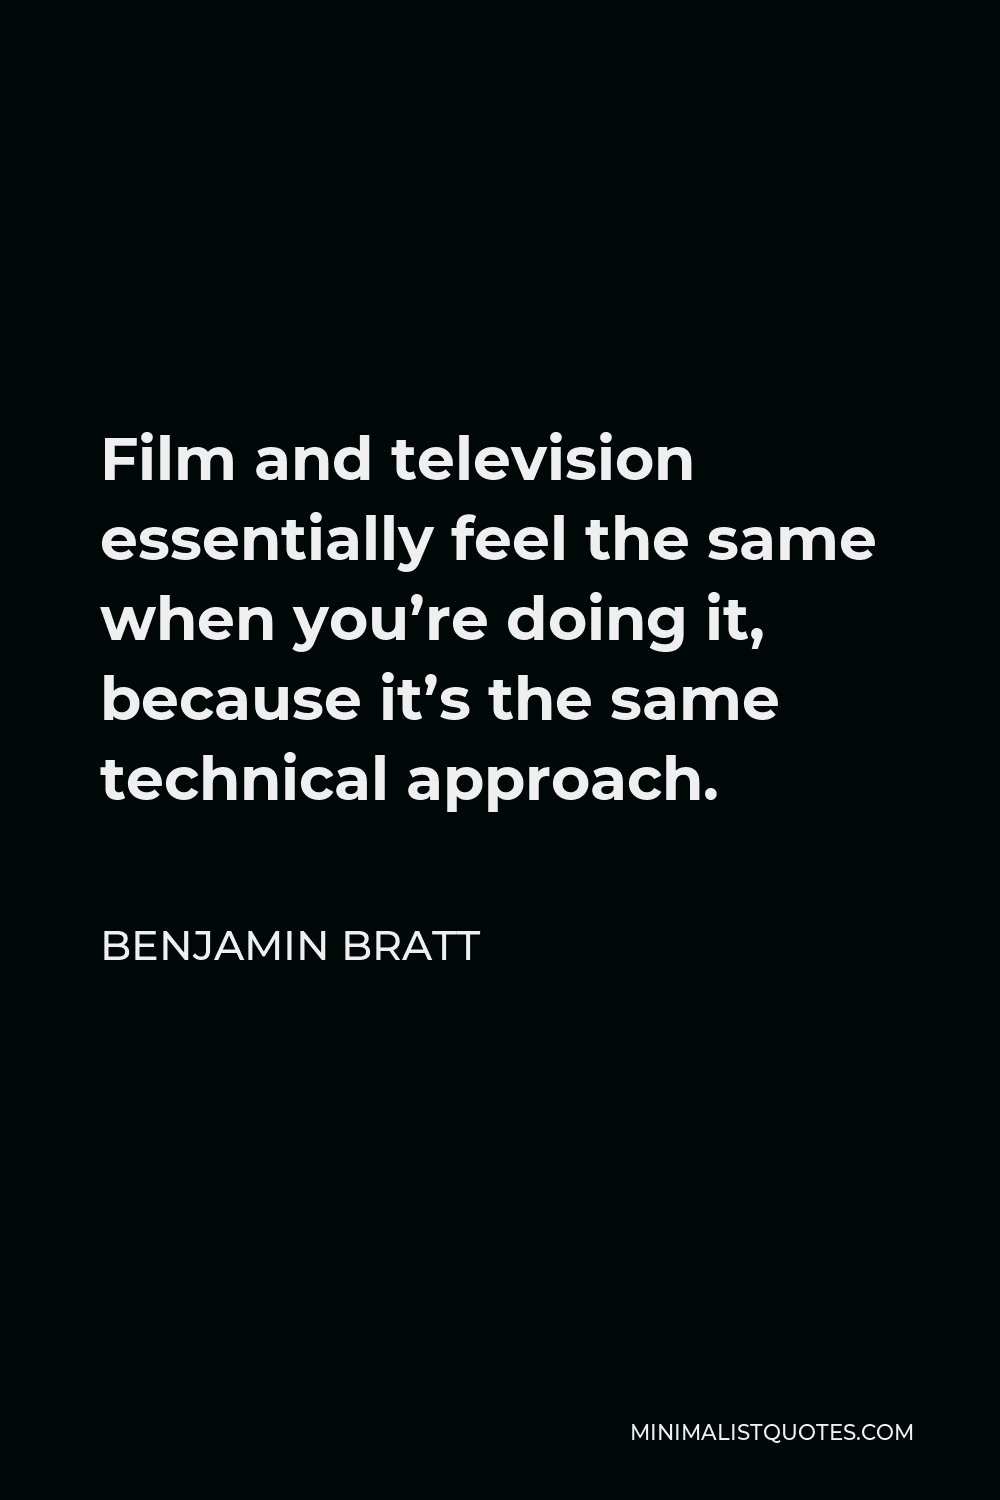 Benjamin Bratt Quote - Film and television essentially feel the same when you’re doing it, because it’s the same technical approach.